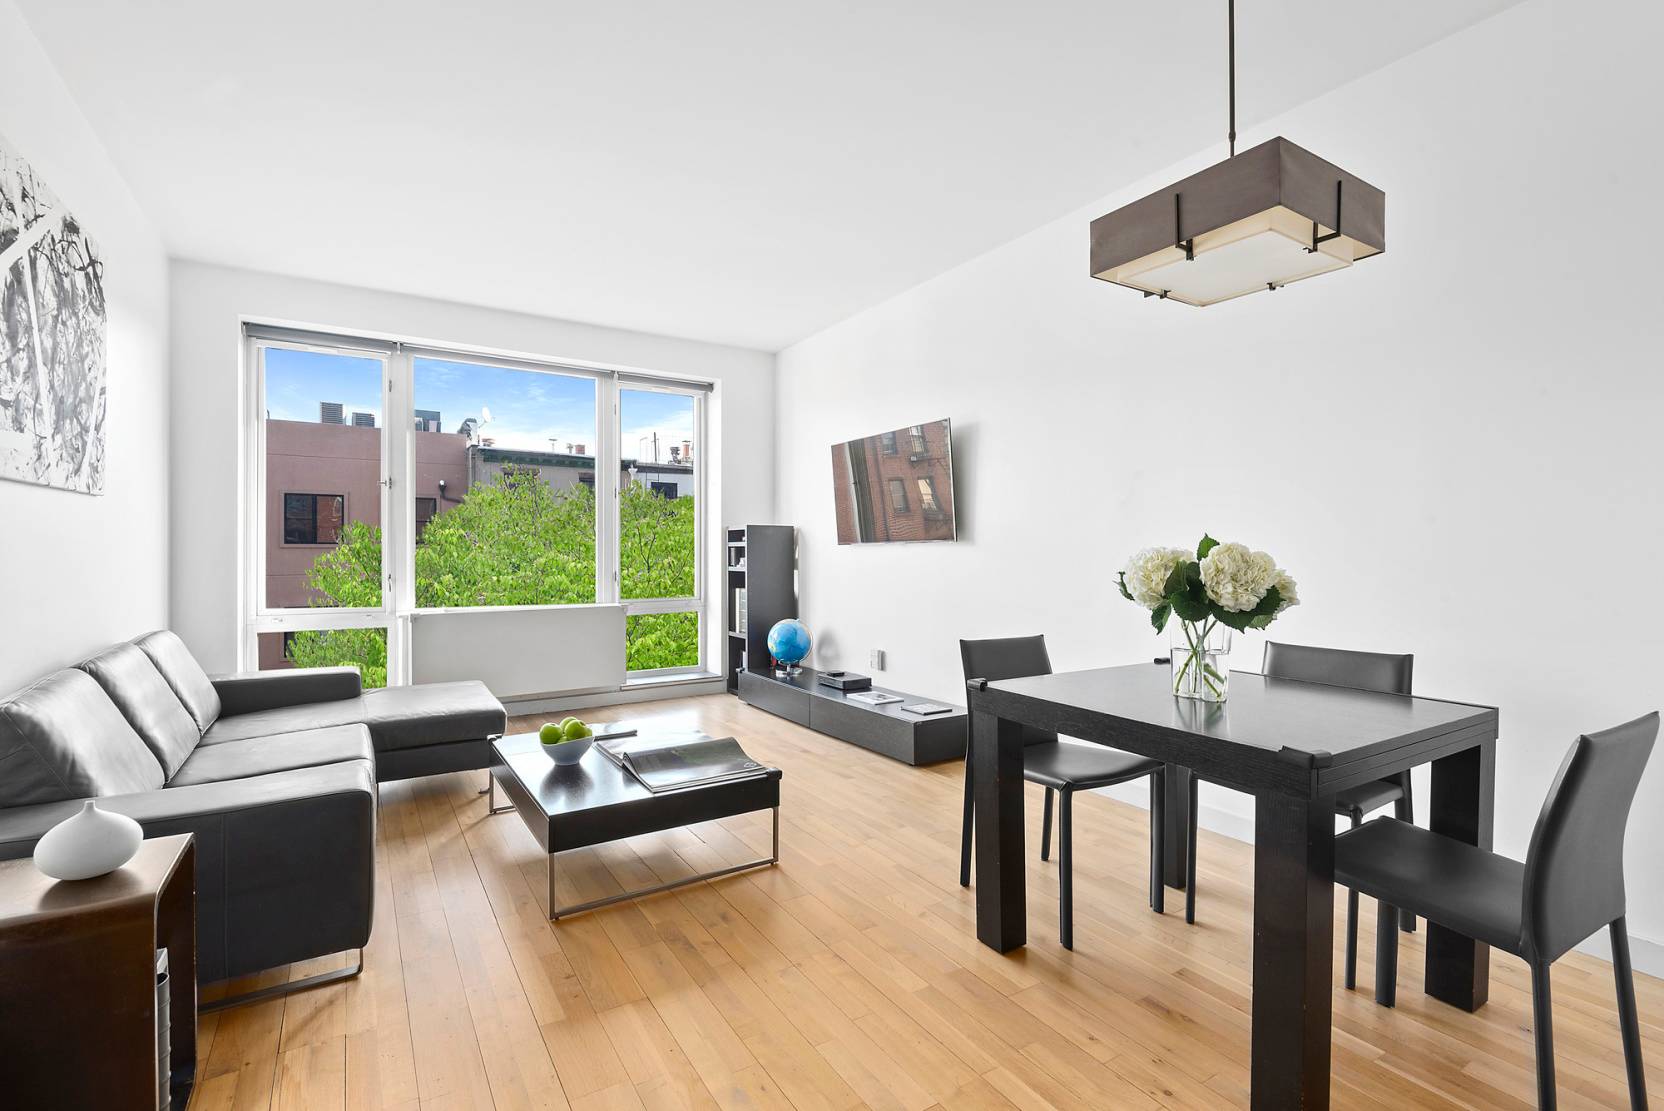 Enjoy your new home at the Isabella in the heart of historic Clinton Hill.